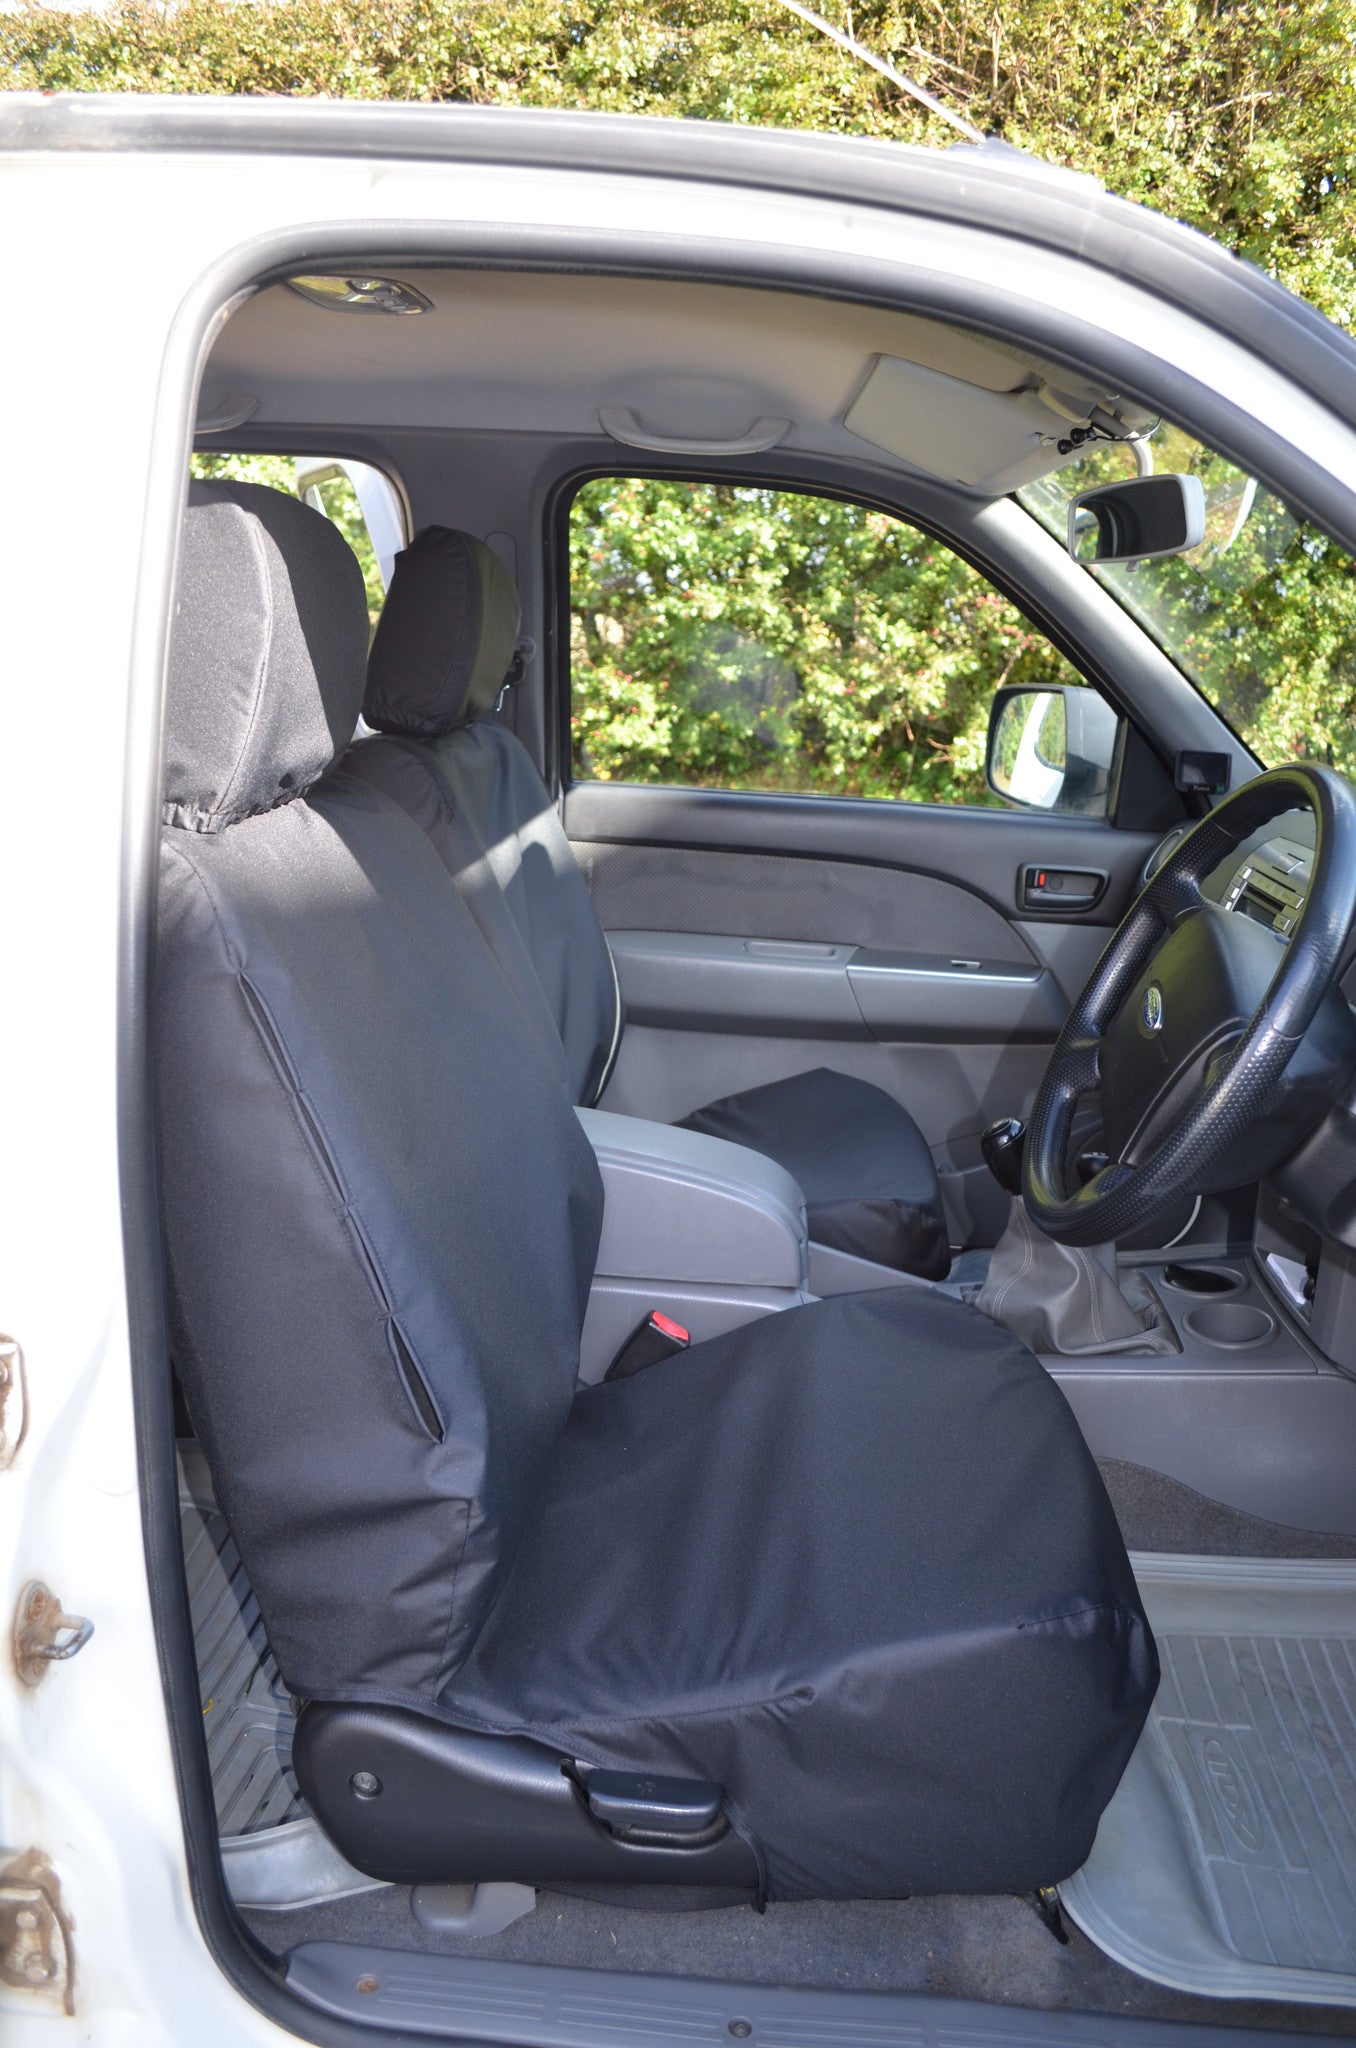 Ford Ranger 2006 to 2012 Seat Covers Front Pair Seat Covers / Black Turtle Covers Ltd